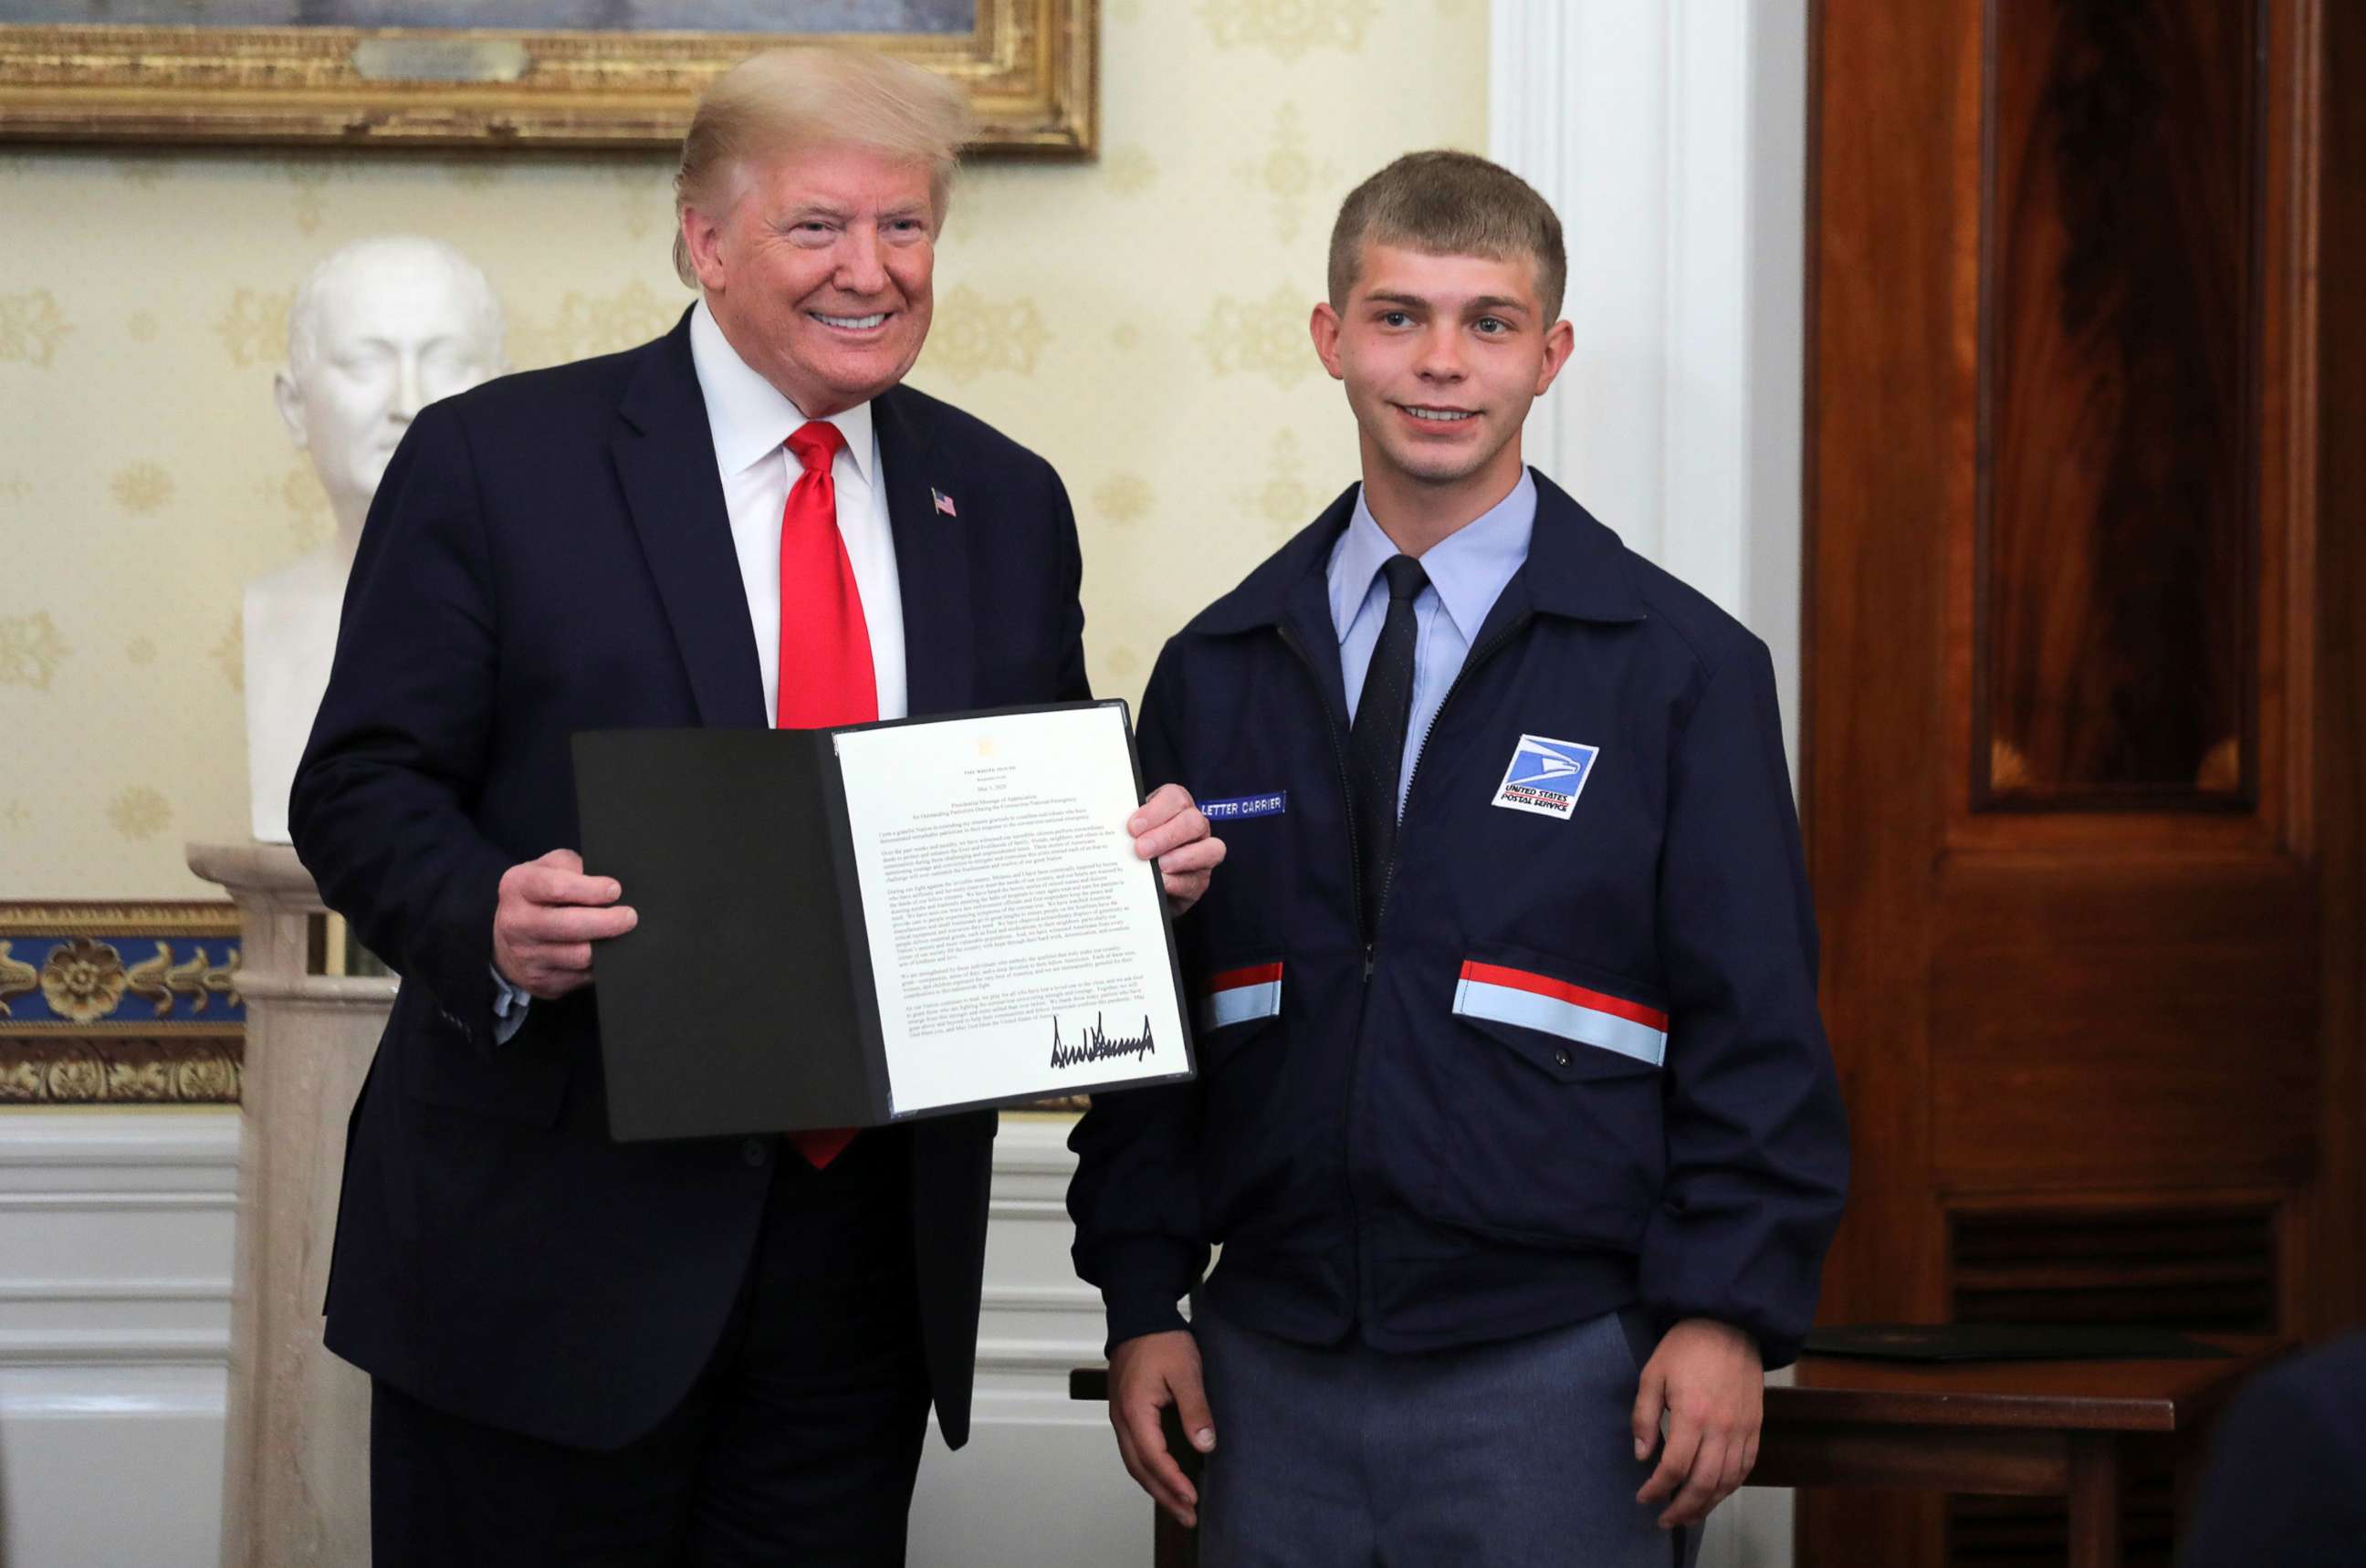 PHOTO: President Donald Trump presents a "Presidential Message of Appreciation" to Kyle West of Cincinnati for his actions delivering essential supplies requested by the elderly people living along his mail route, at the White House, May 1, 2020.